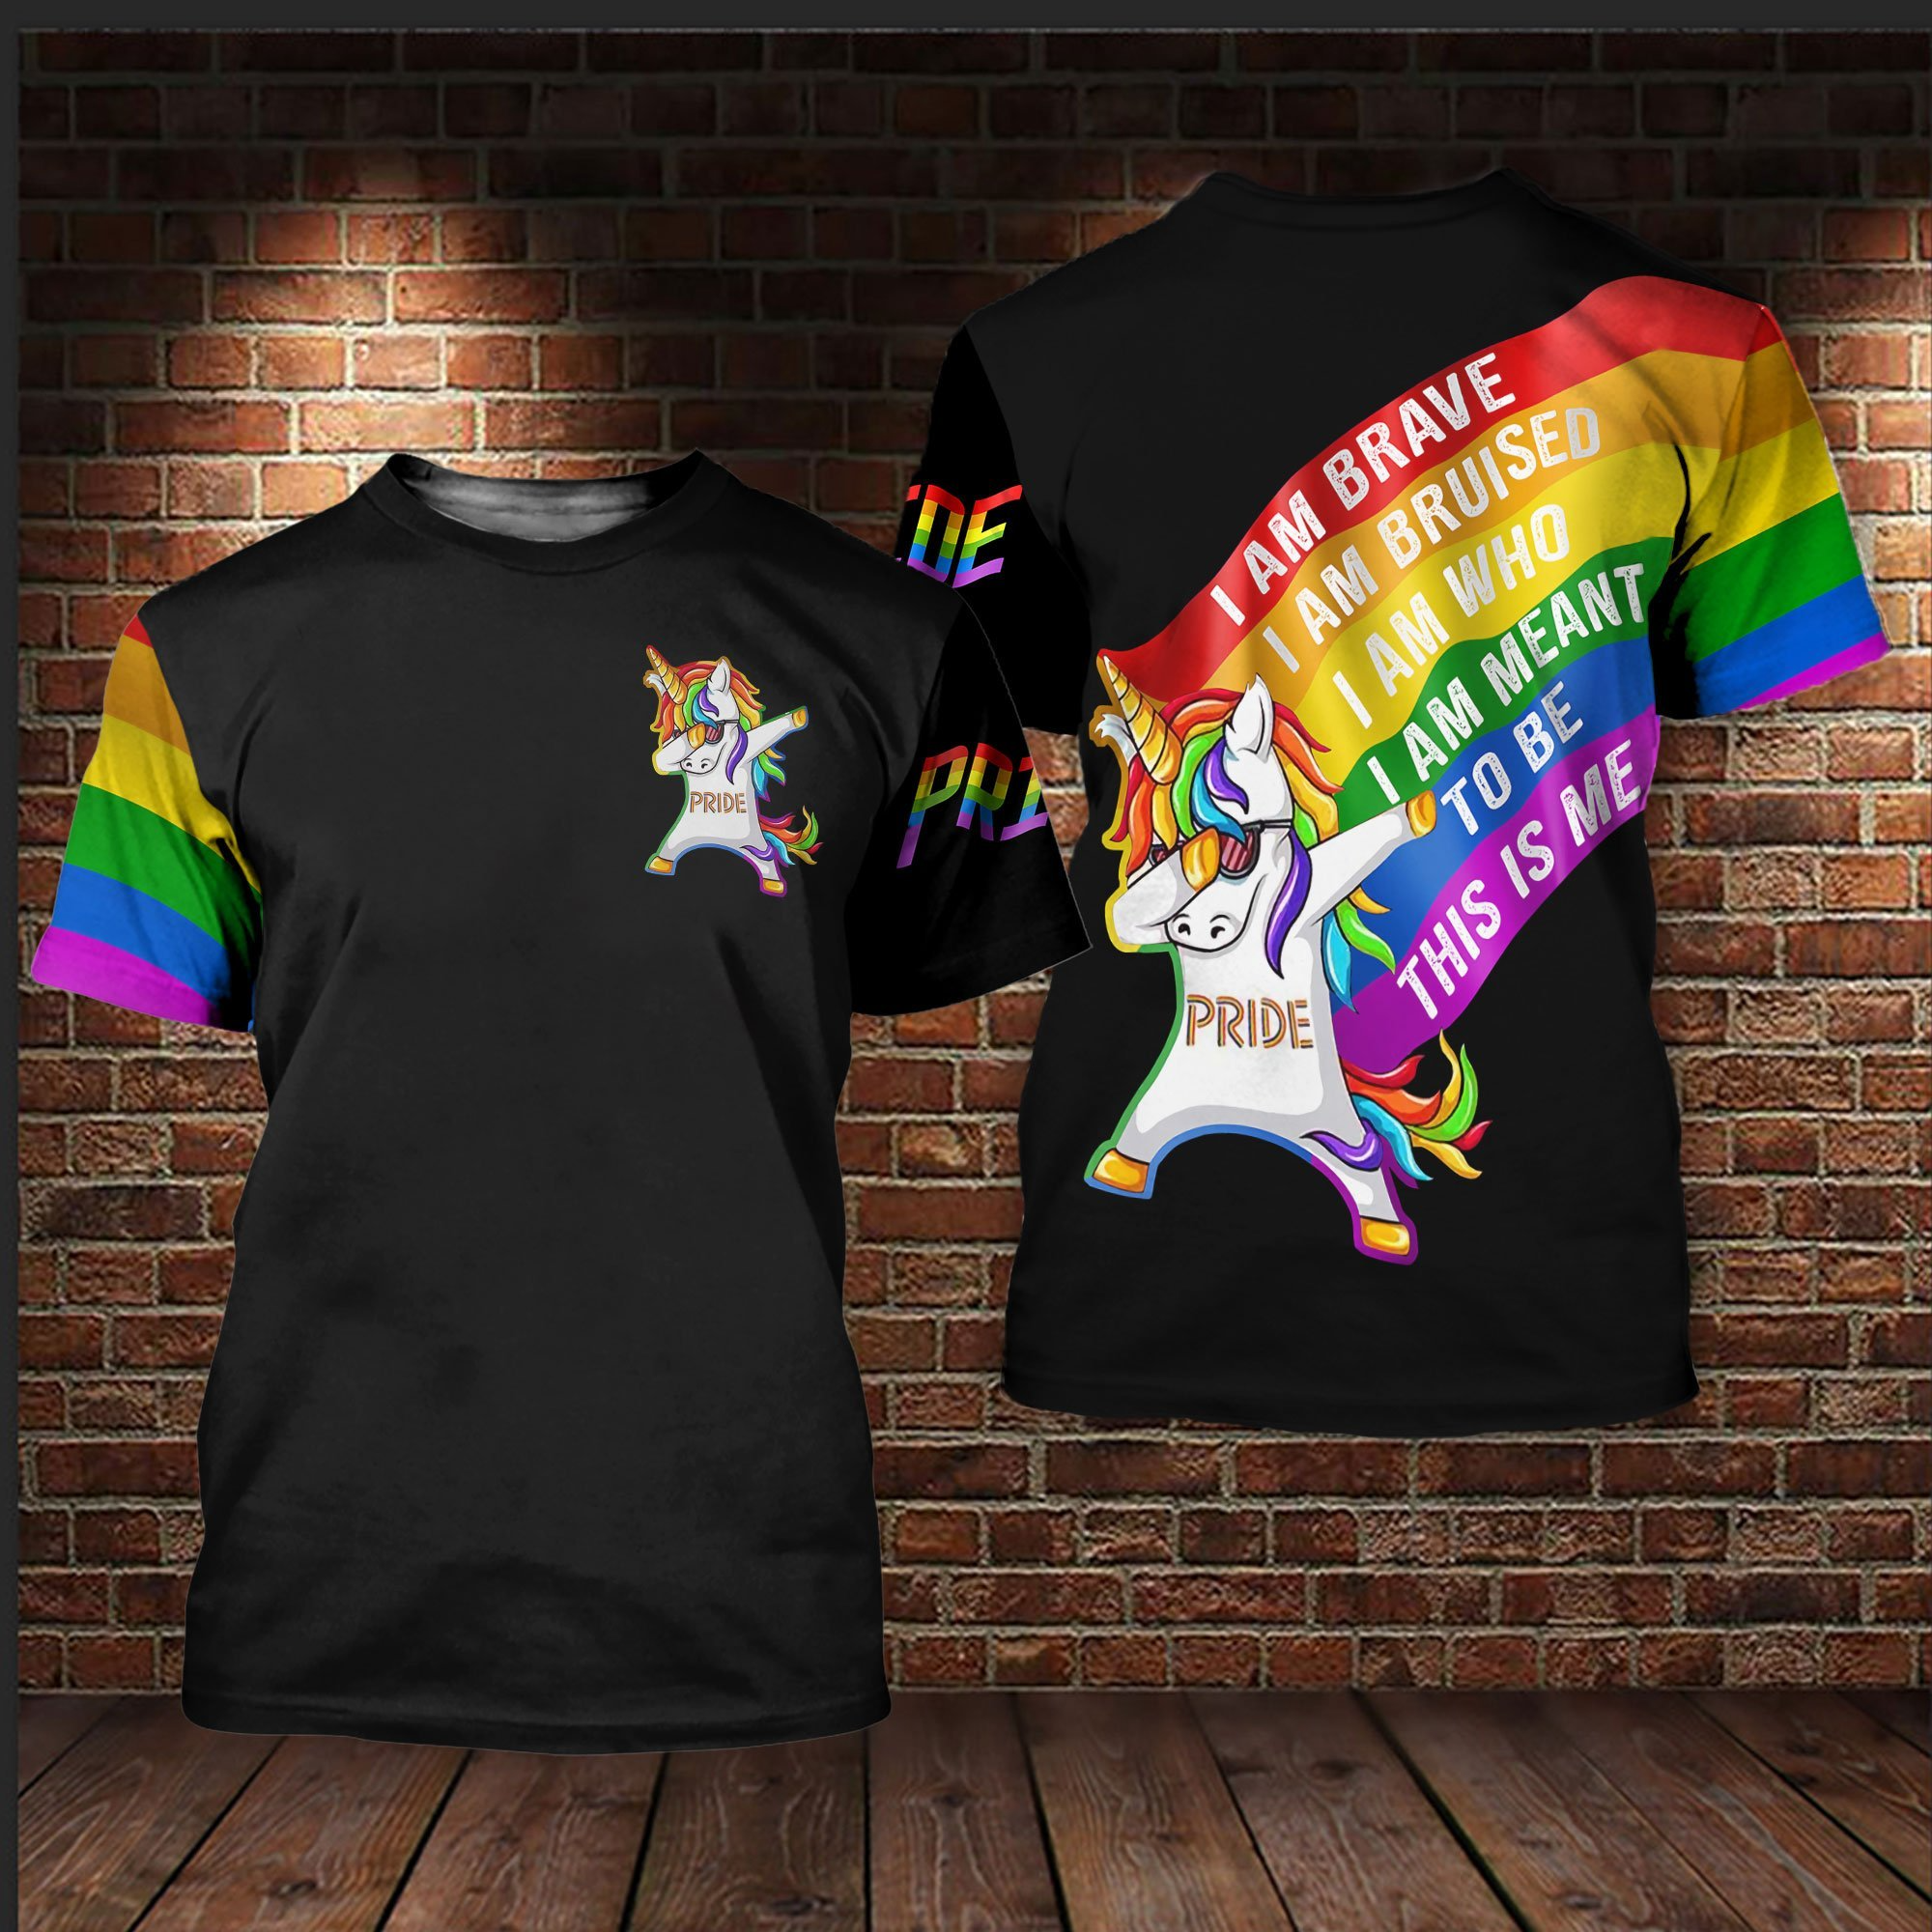 LGBT Shirts For LGBT Community/ Gift For LGBT Pride Month/ Bisexual Shirts For LGBT History Month